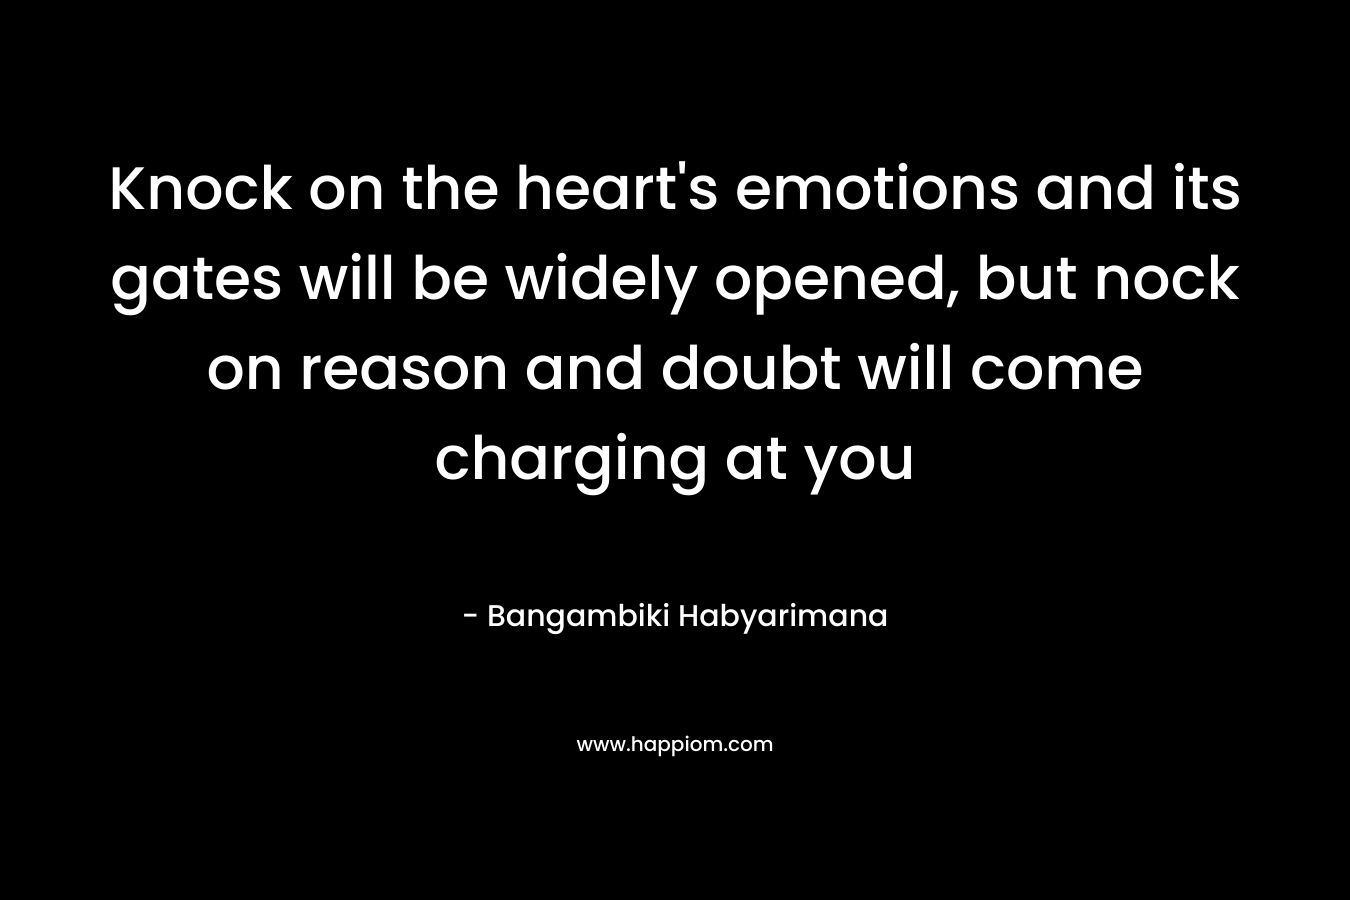 Knock on the heart’s emotions and its gates will be widely opened, but nock on reason and doubt will come charging at you – Bangambiki Habyarimana